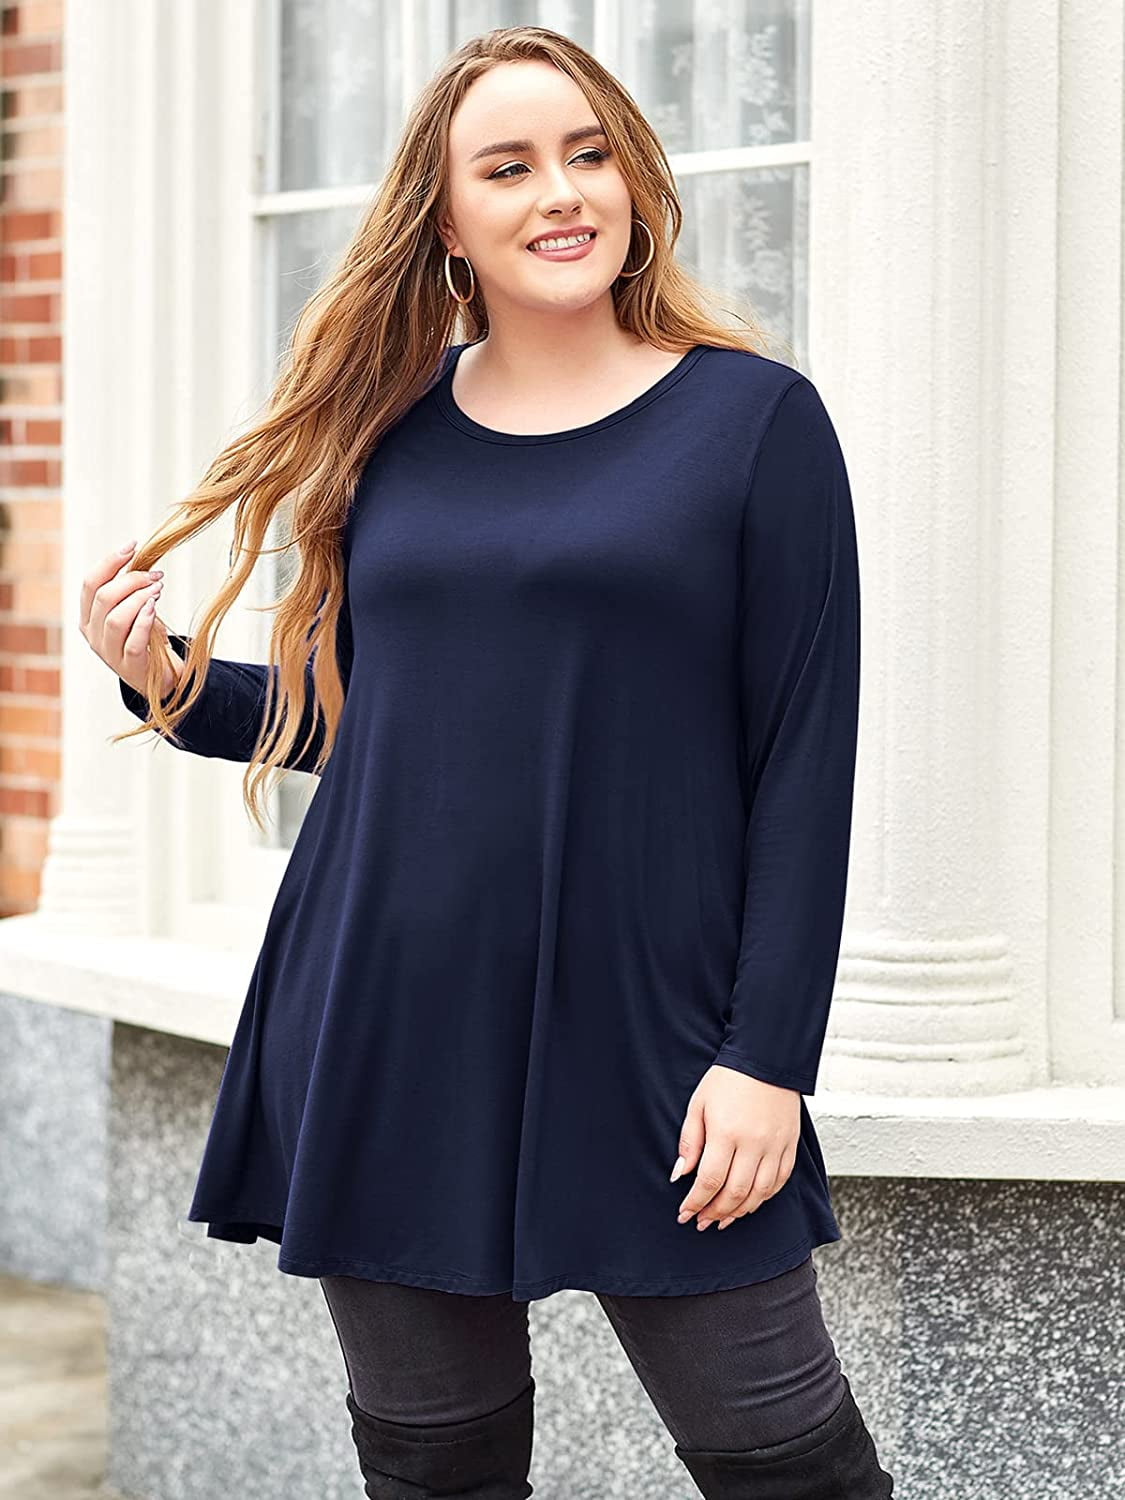 RQYYD Women's Plus Size Tops Summer Short Sleeve Crewneck Long Tunic Tops  Casual Solid Oversized Shirt Blouse to wear with leggings with  Pockets(Navy,M) 